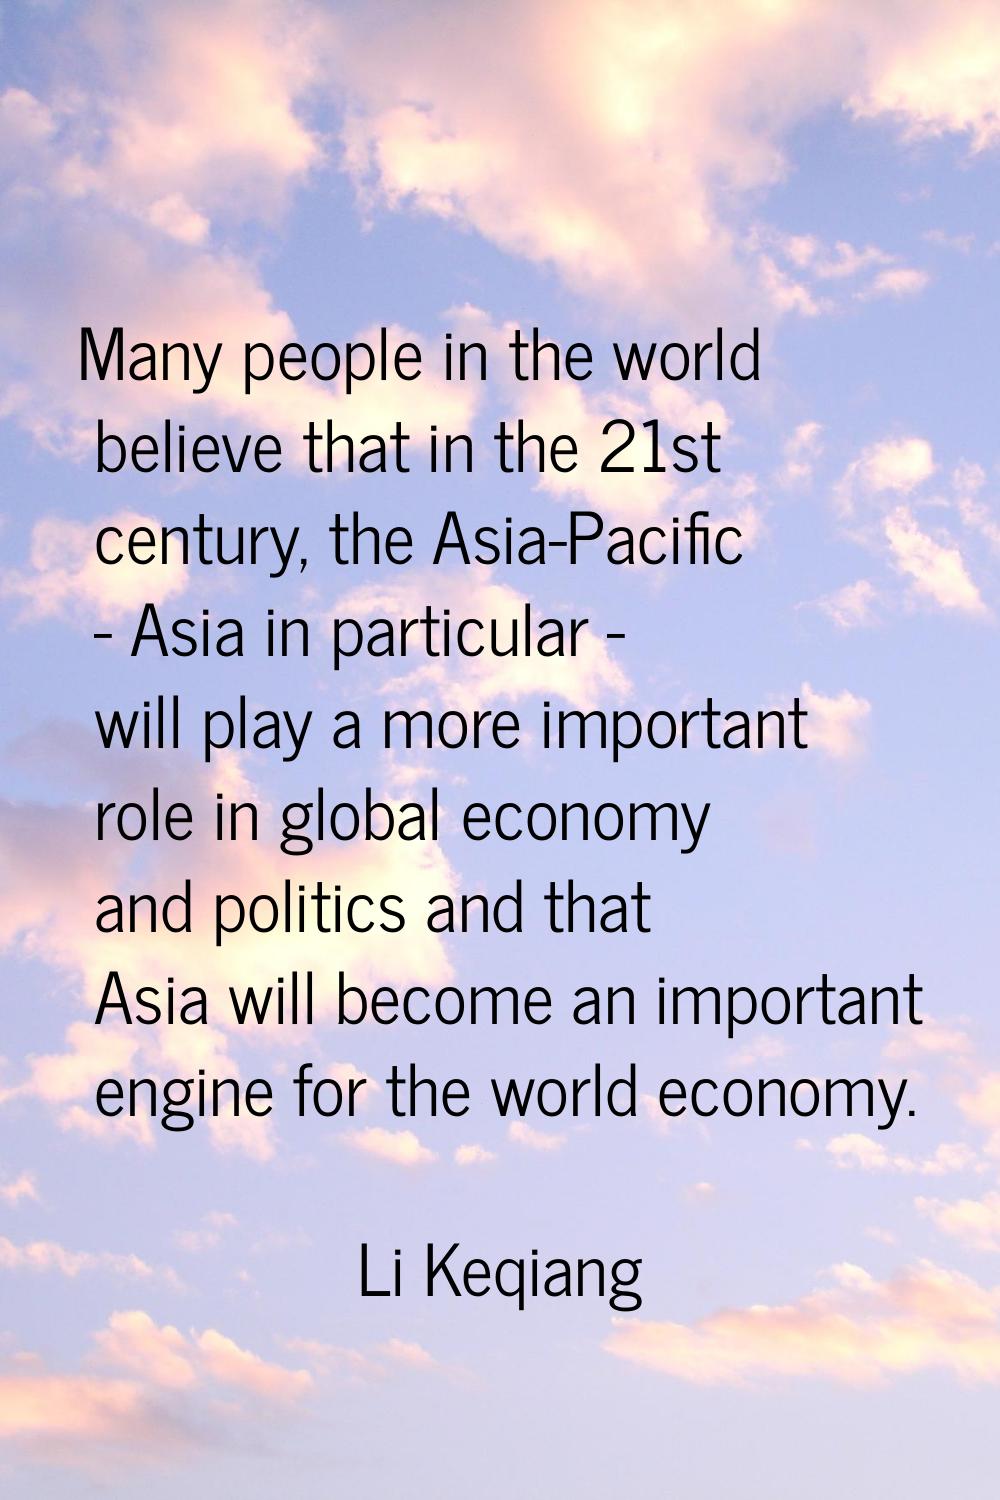 Many people in the world believe that in the 21st century, the Asia-Pacific - Asia in particular - 